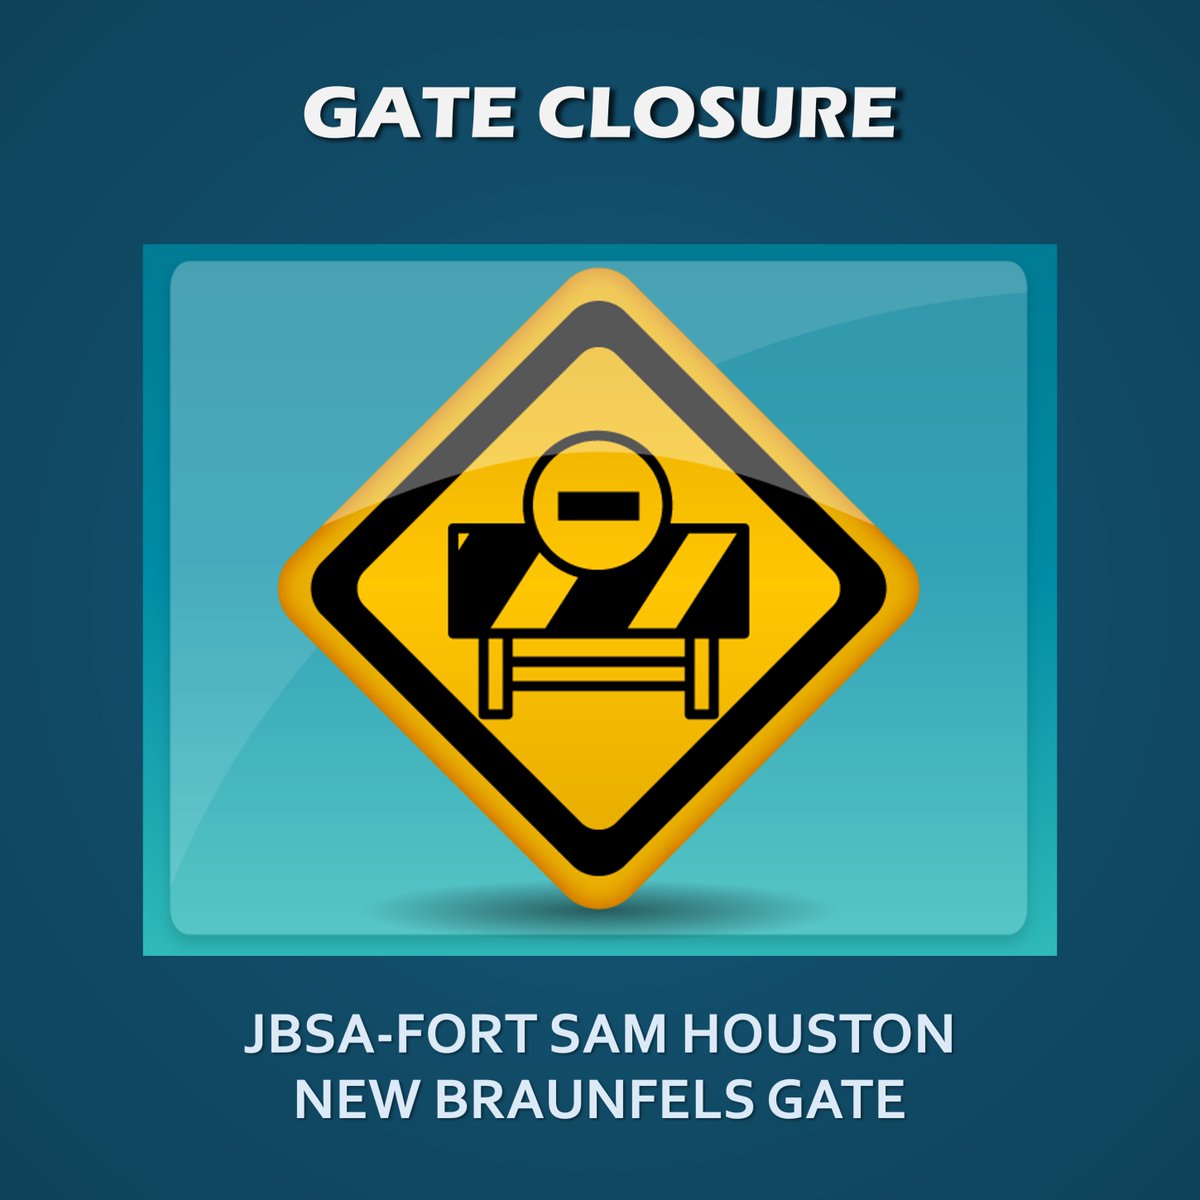 🚨 Attention JBSA-Fort Sam Houston Community 🚨 Please be informed that the New Braunfels gate will be closed tomorrow (April 26) in observance of the Army DONSA Day. Plan your entry and exit accordingly.